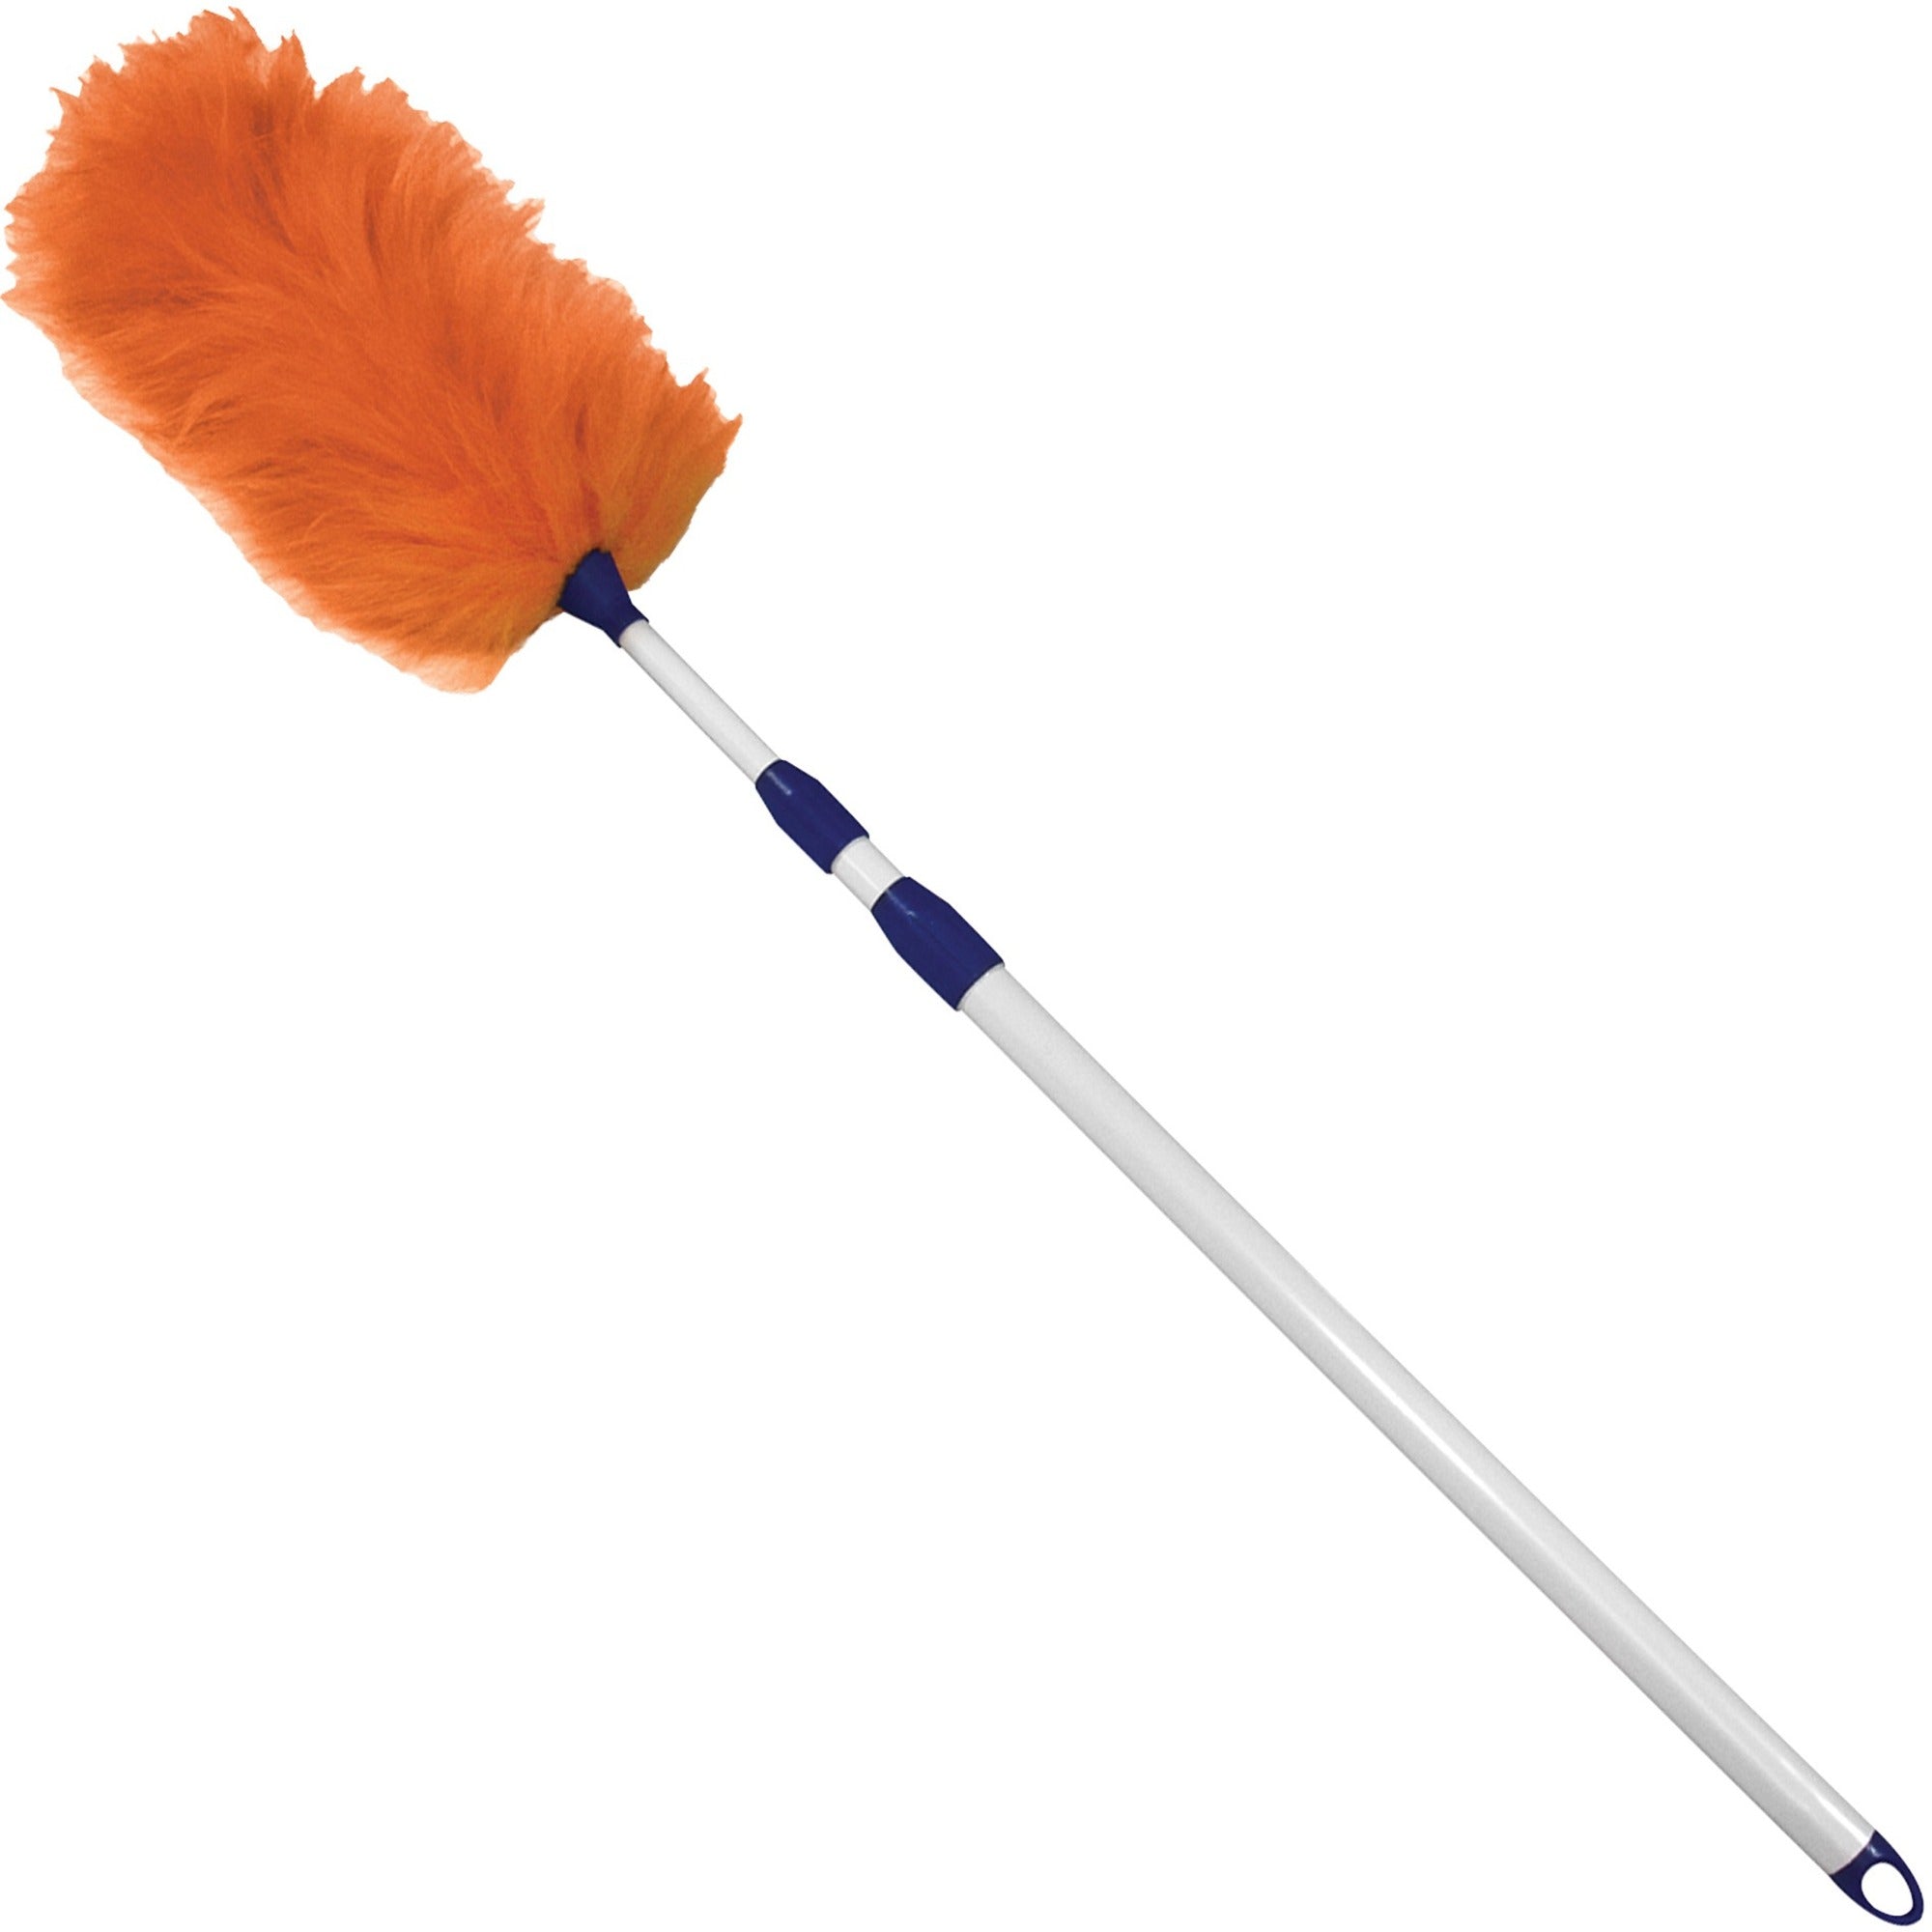 Impact Adjustable Lambswool Duster - 60" Overall Length - White Handle - 1 Each - Assorted, Multi - 